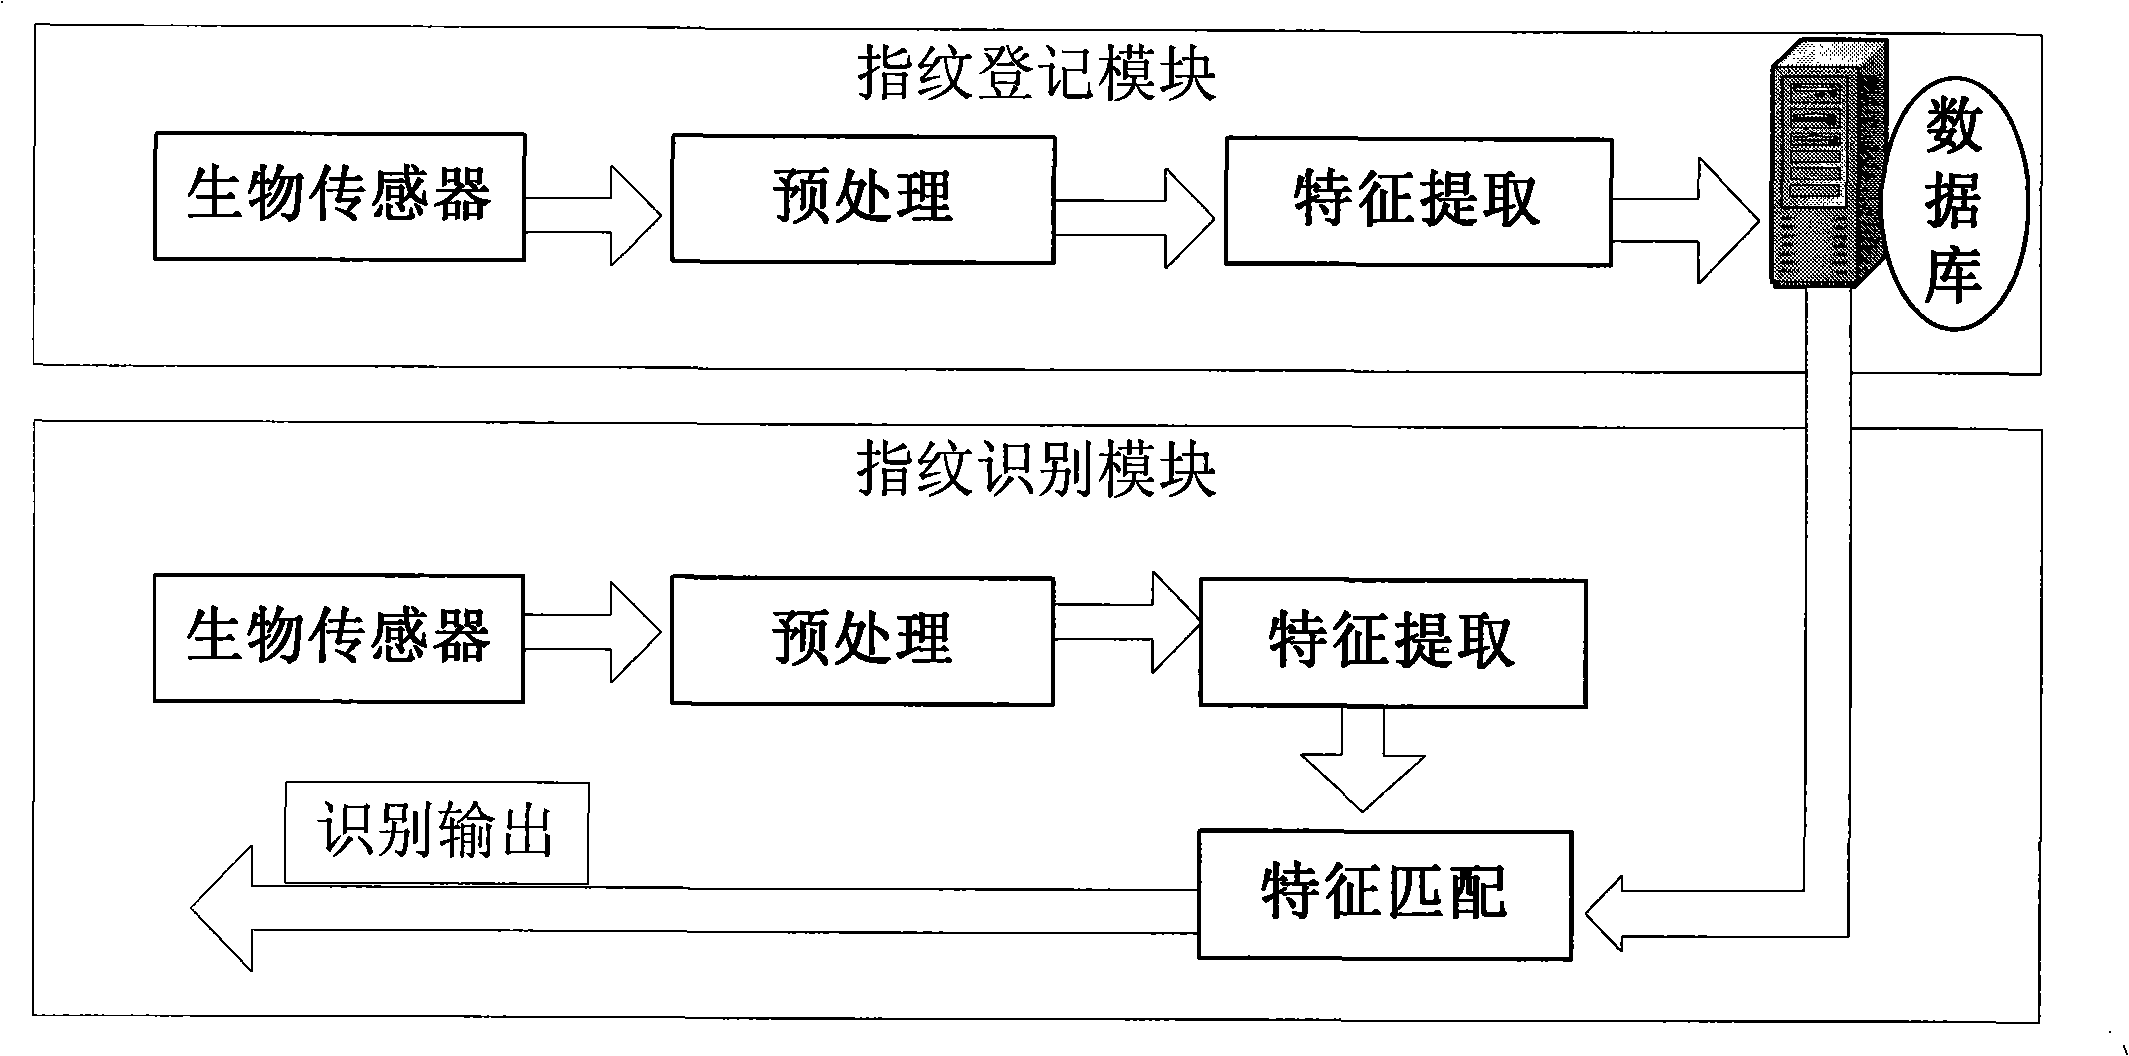 Multi-fingerprint password recognition method and system based on field programmable gate array